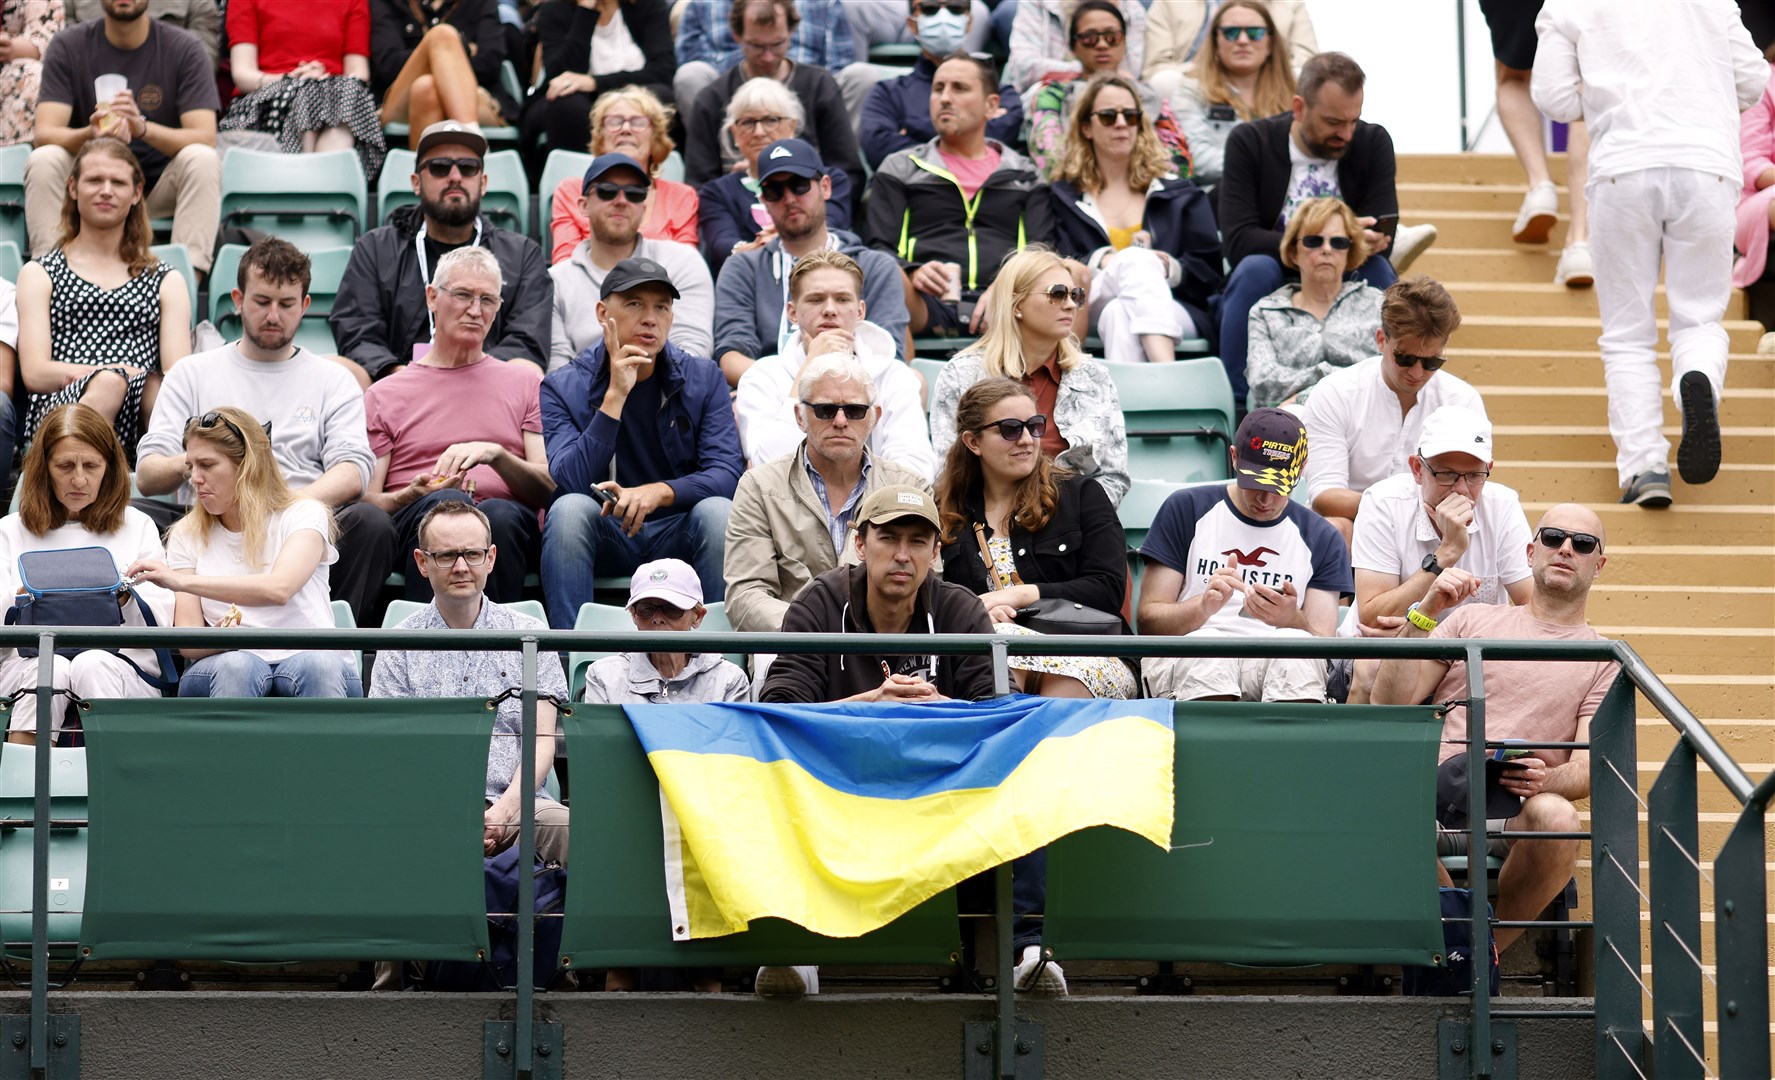 A Ukraine flag in the stands as Lesia Tsurenko plays her ladies’ singles first round match against Jodie Burrage (Steven Paston/PA)